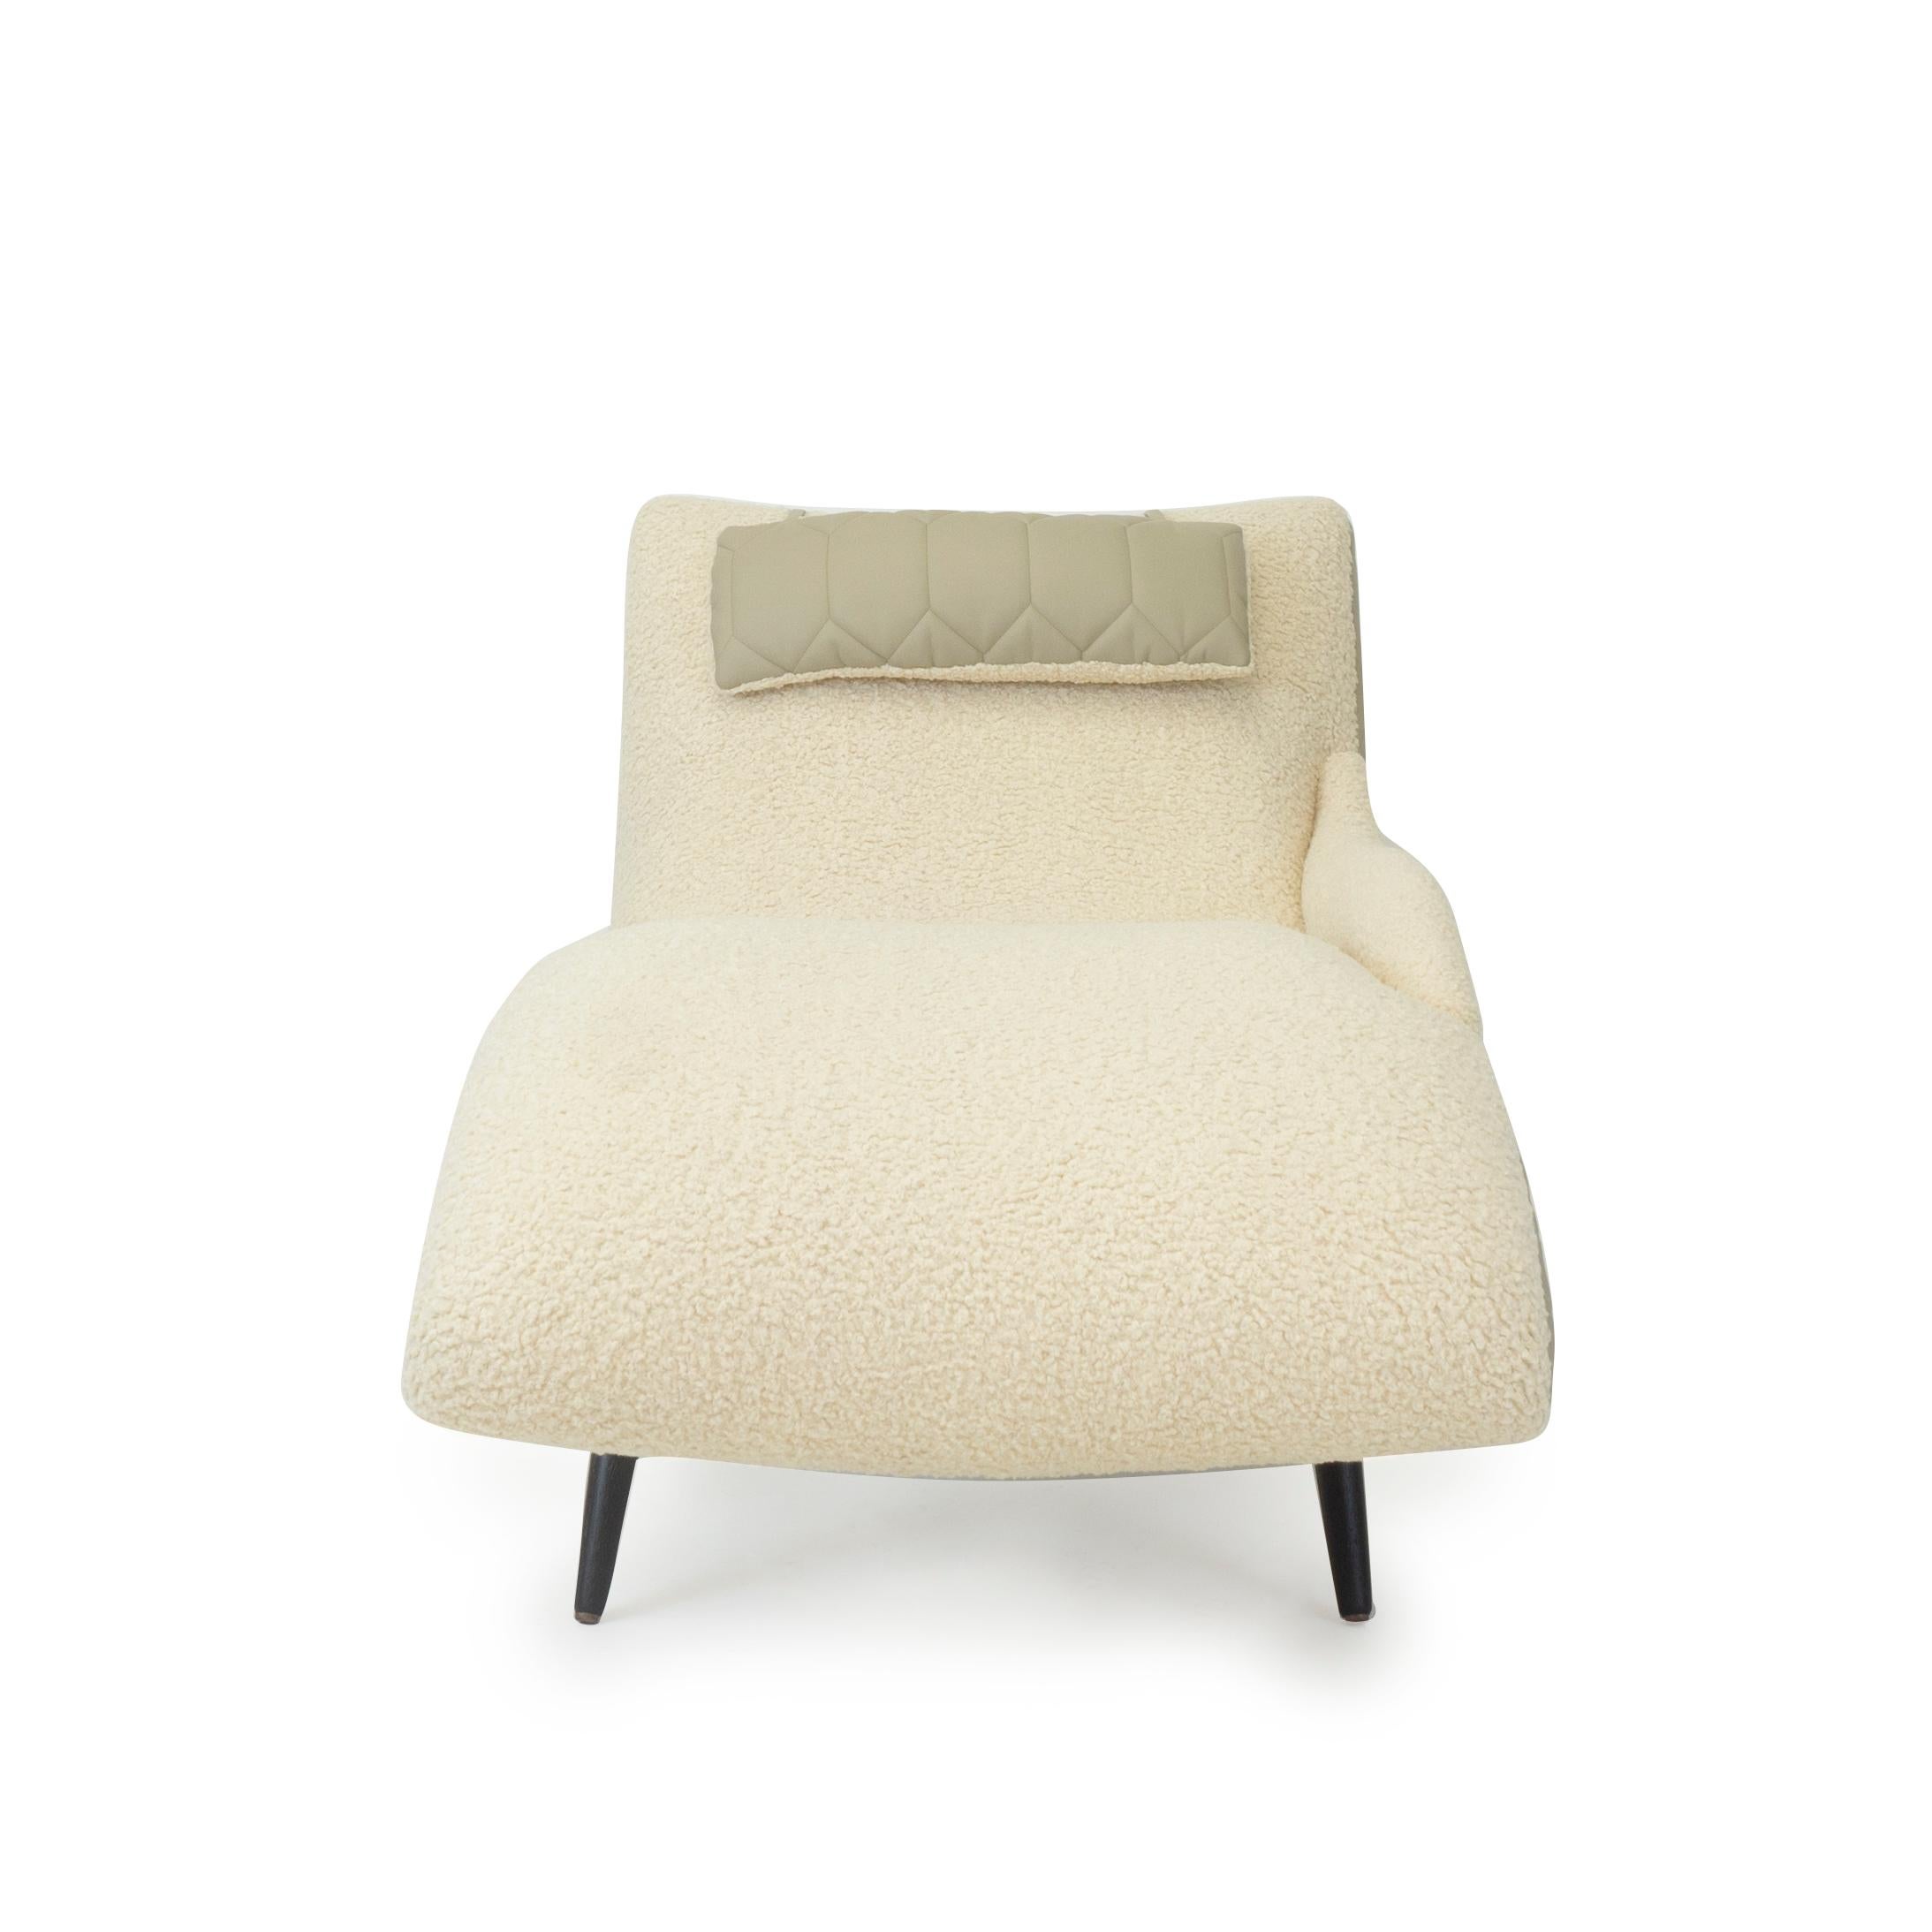 contemporary chaise lounge chair